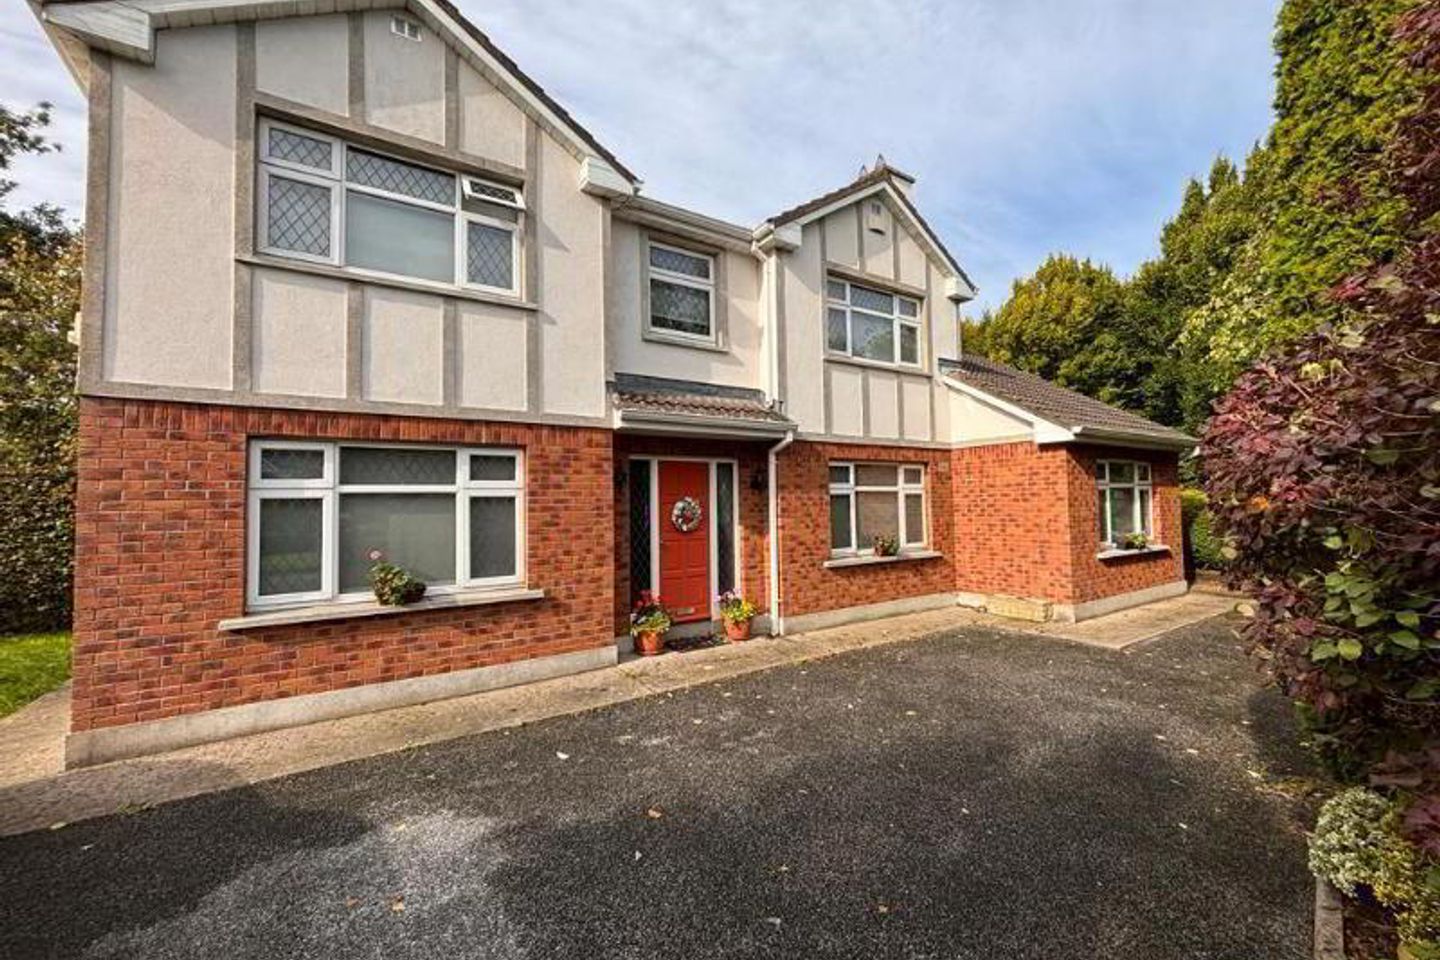 Suirvale, 18 Beechwood Drive, Clonmel, Co. Tipperary, E91PD61